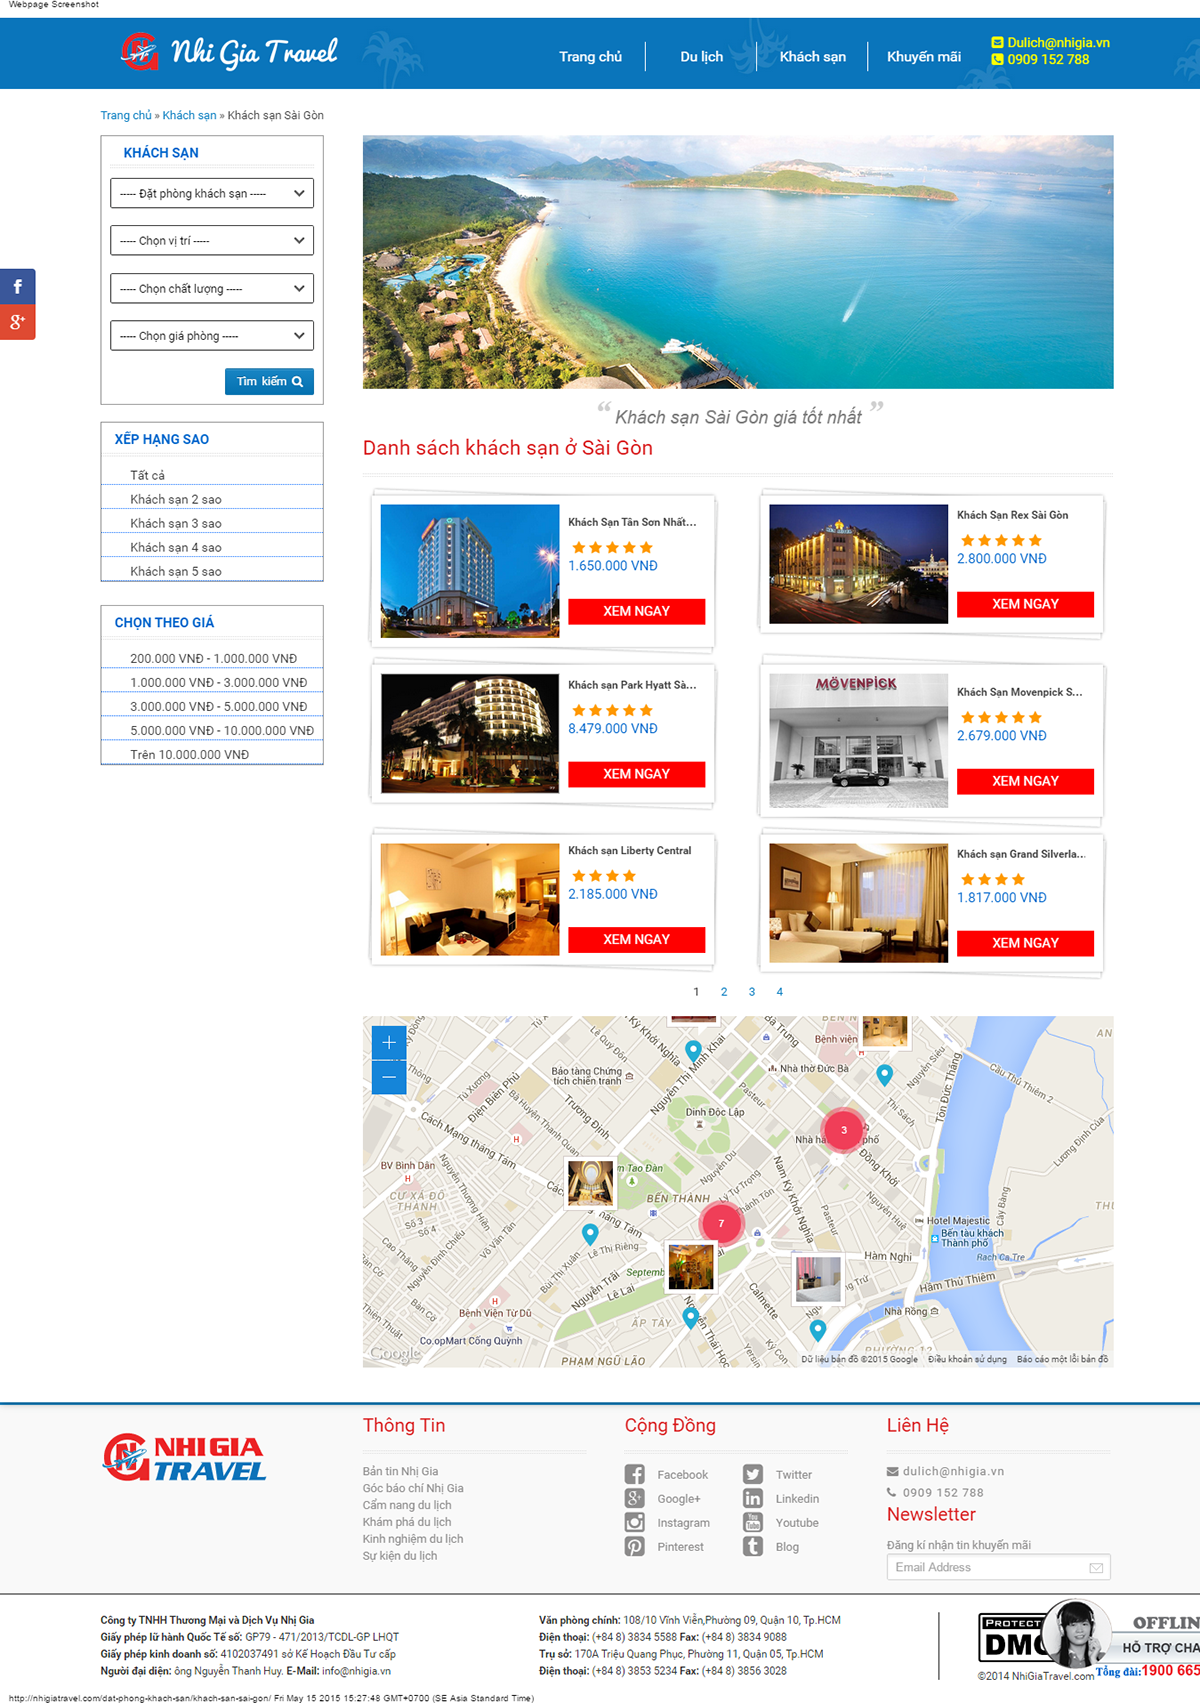 travel agency hotel booking